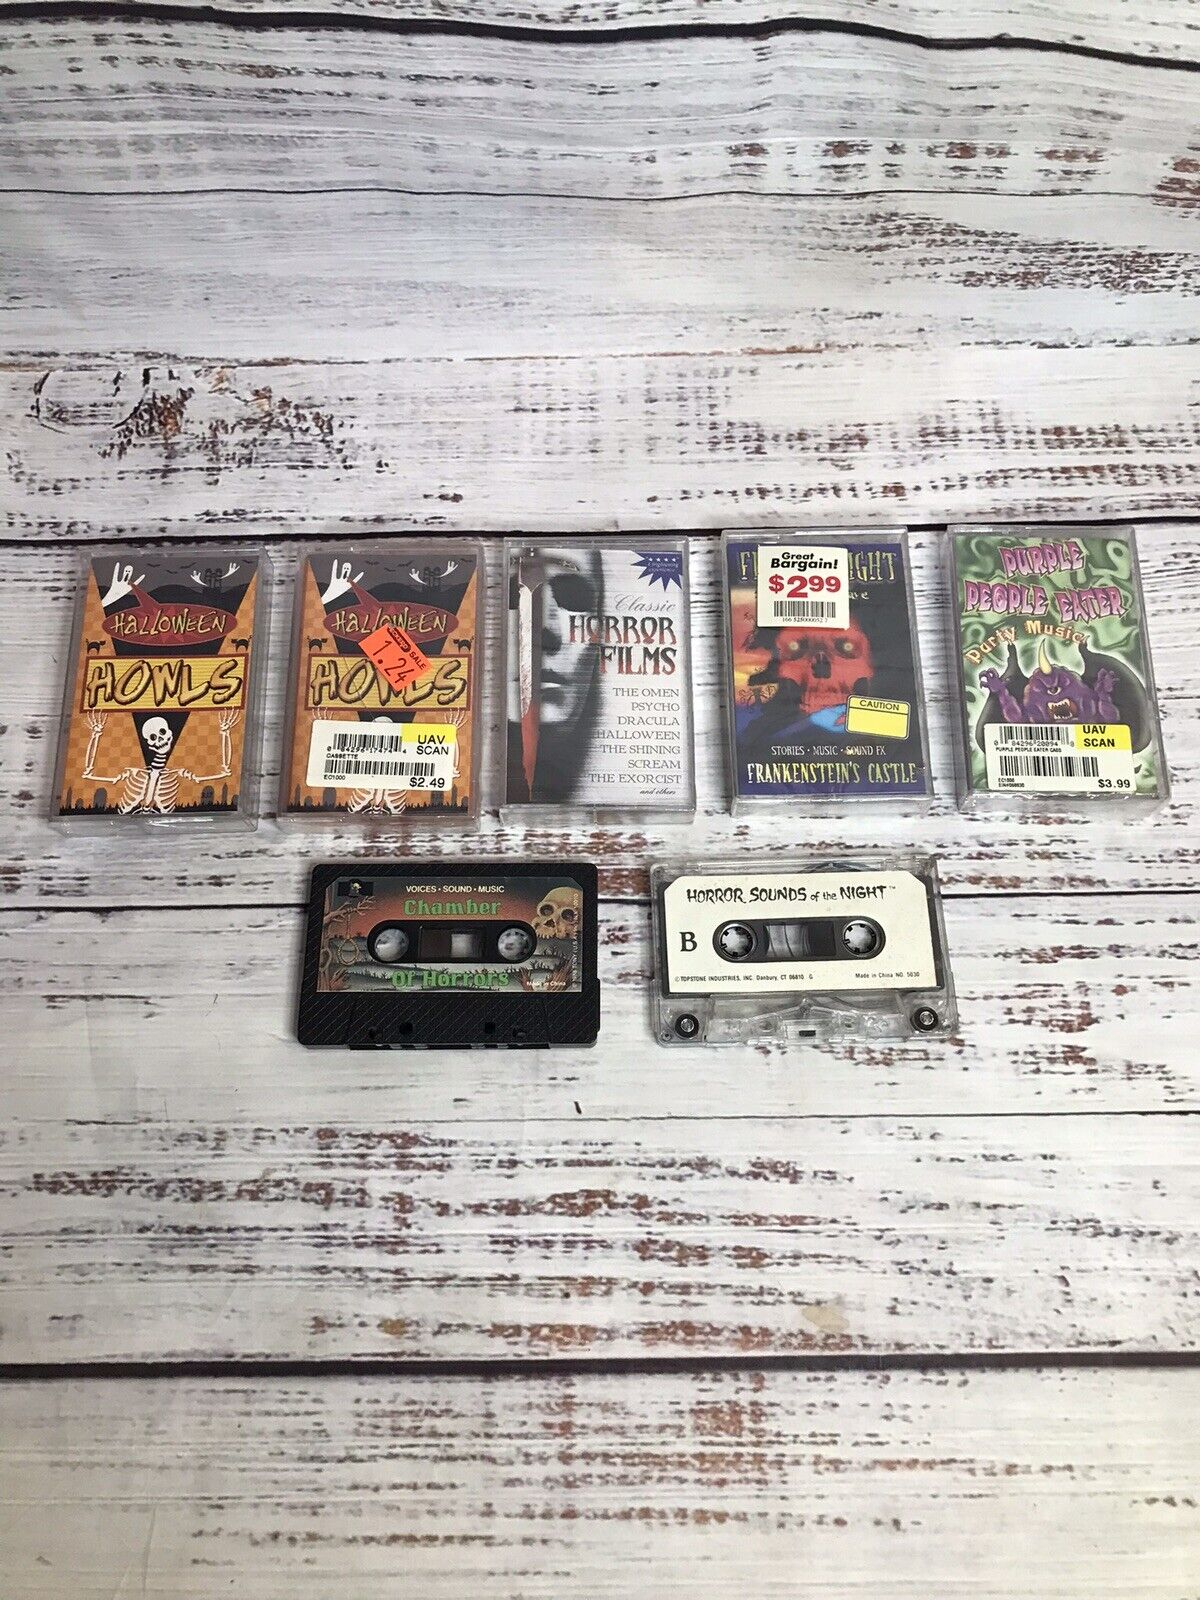 Lot of 7 Vintage Halloween Cassette Tapes Music Sound Effects Horror Film Scary